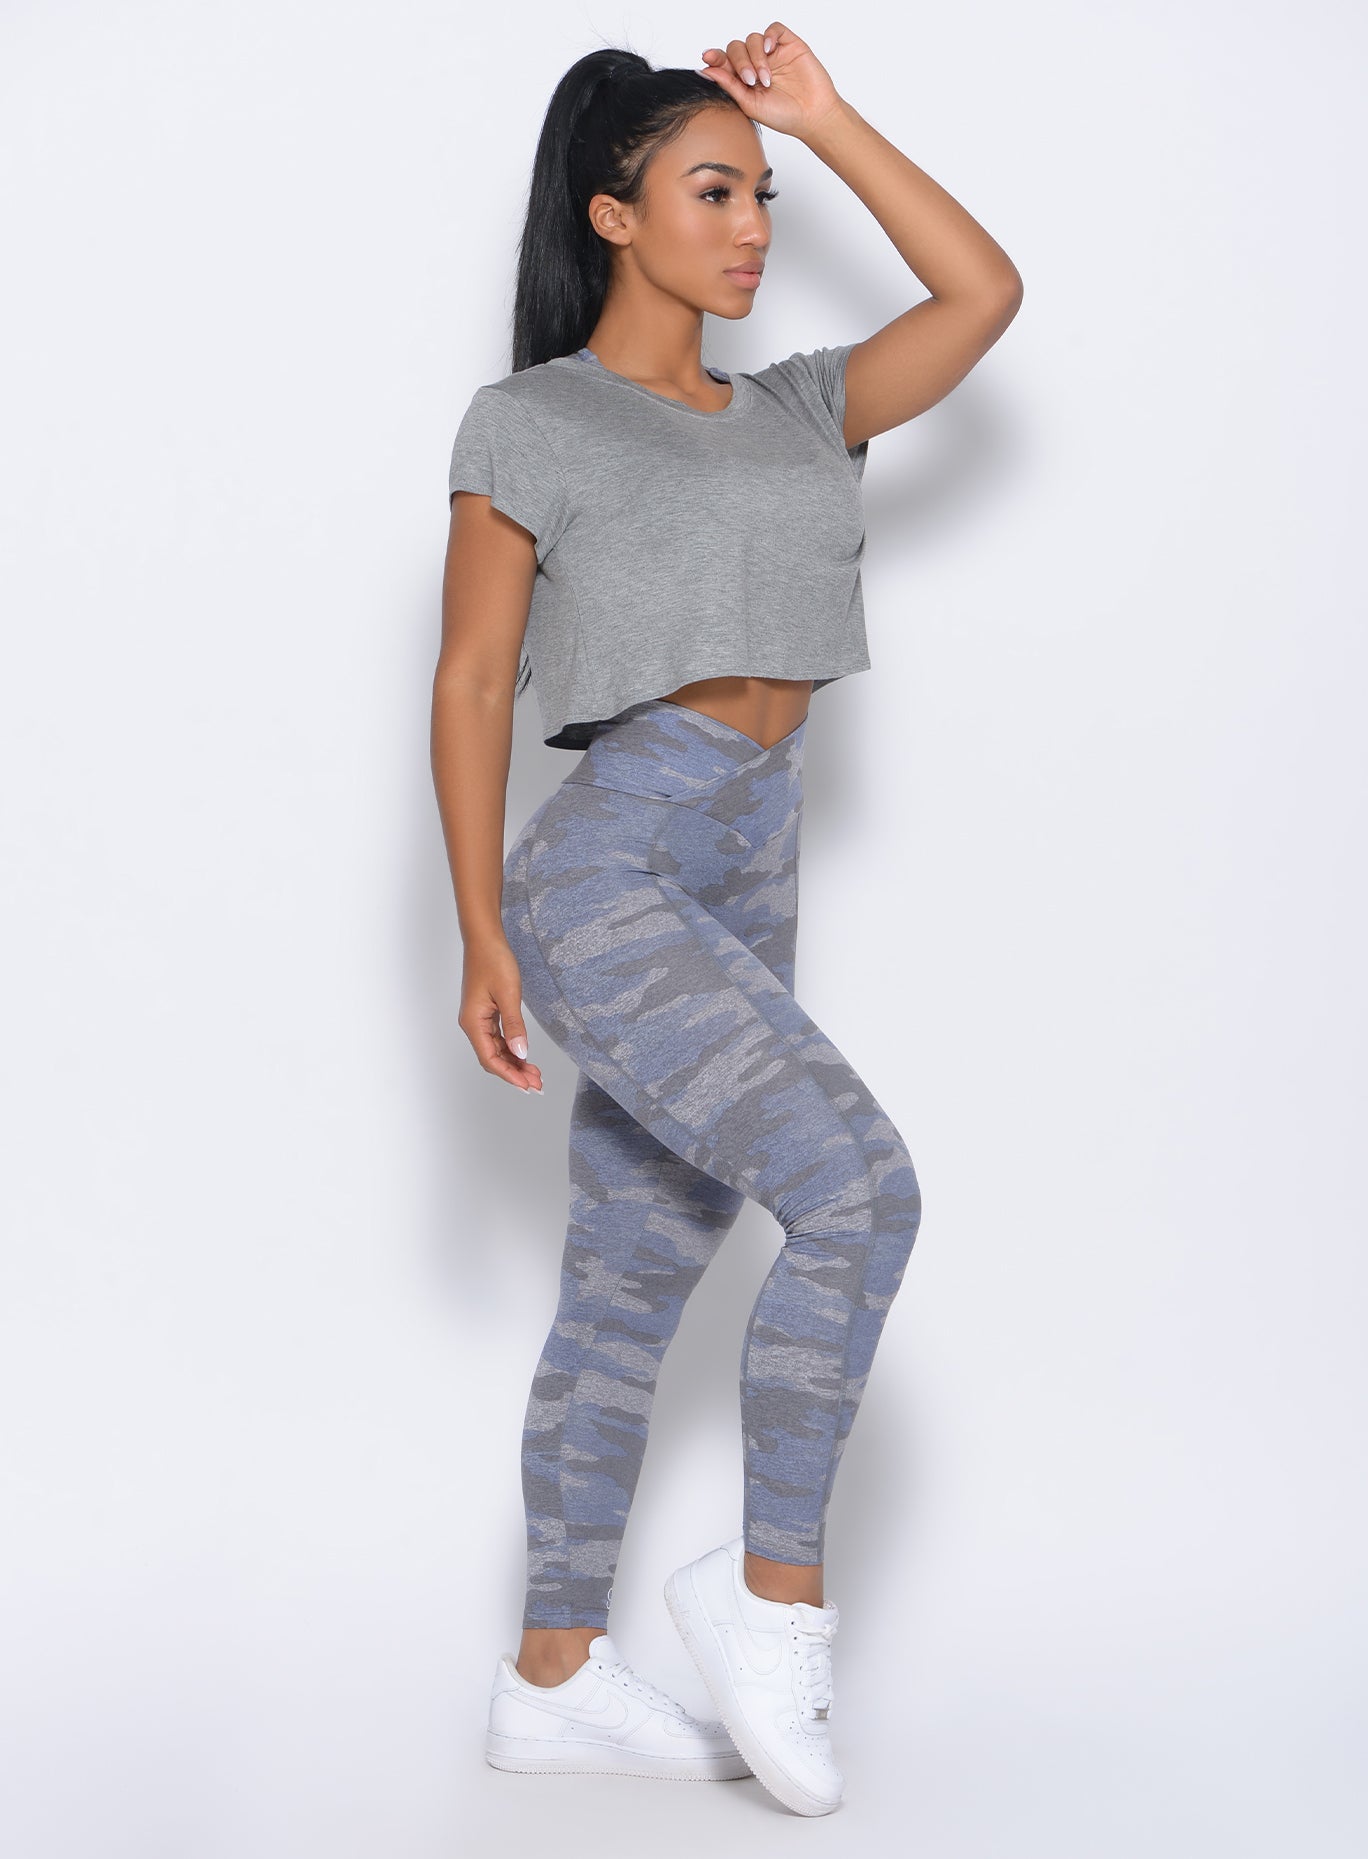 Right side view of the model in our freedom tee in silver color and a matching leggings